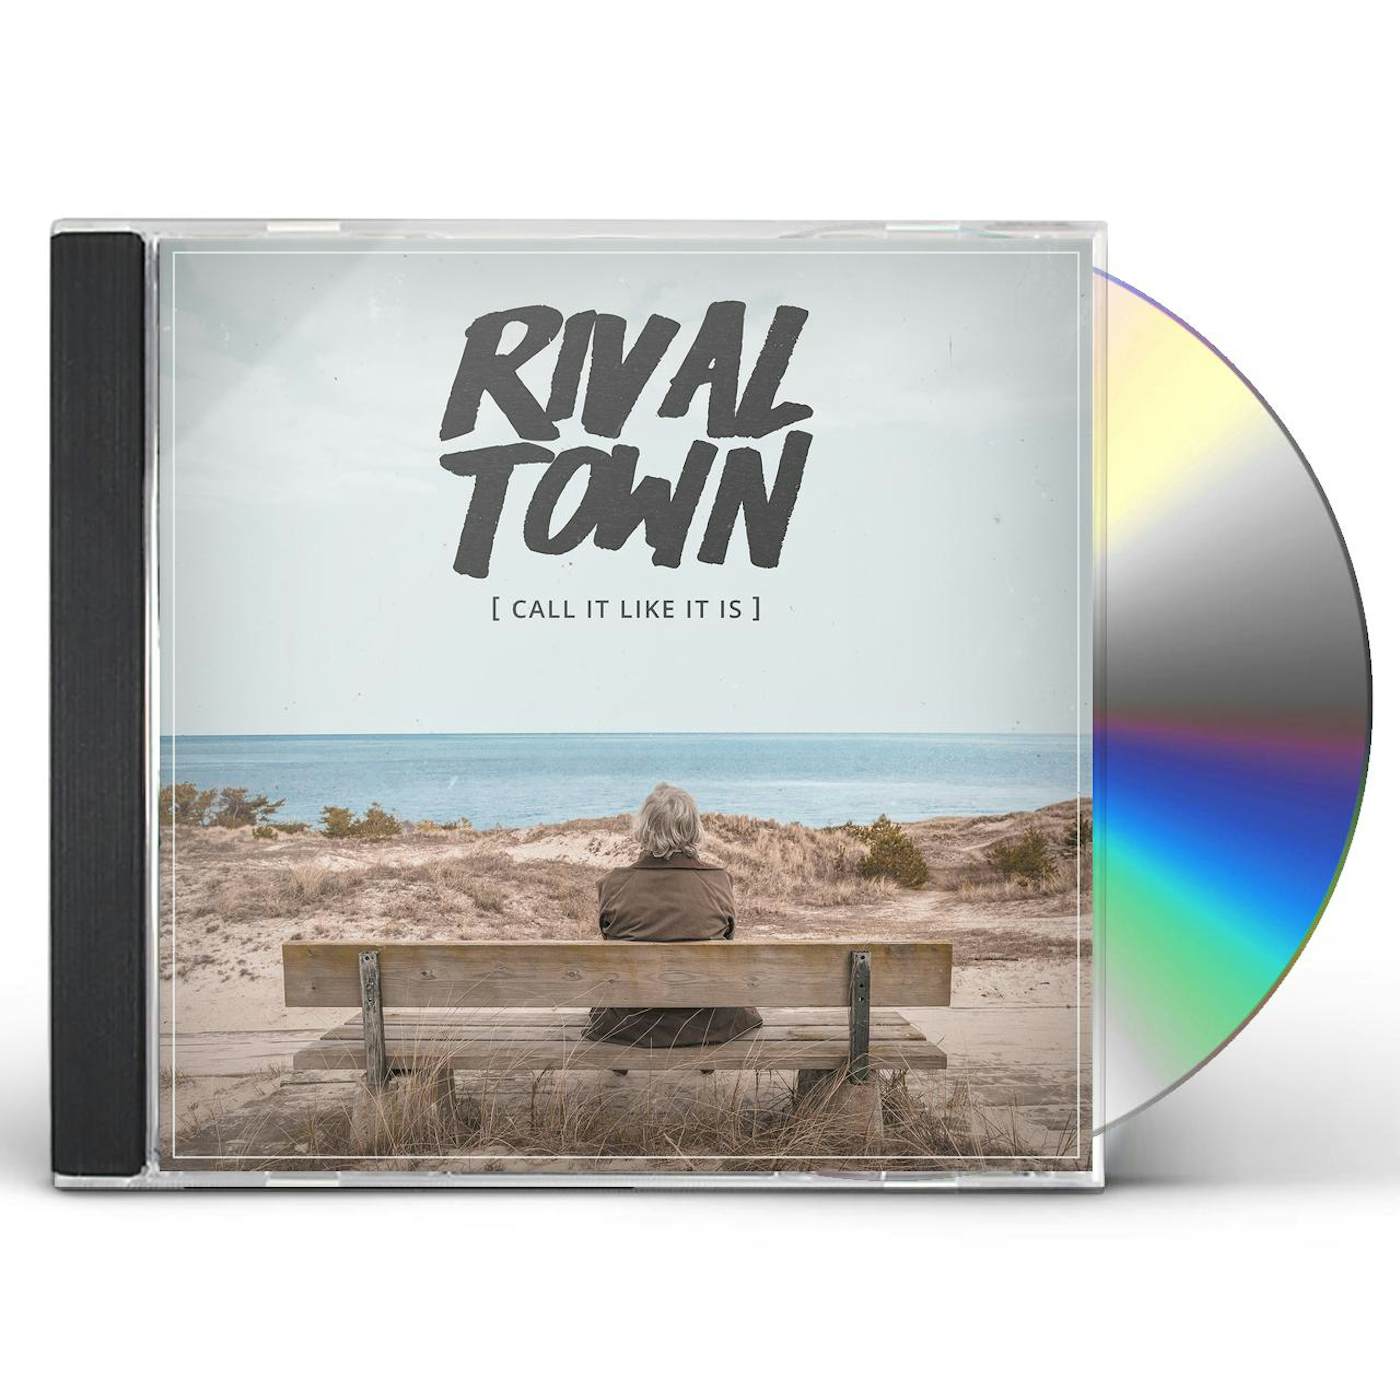 Rival Town CALL IT LIKE IT IS CD